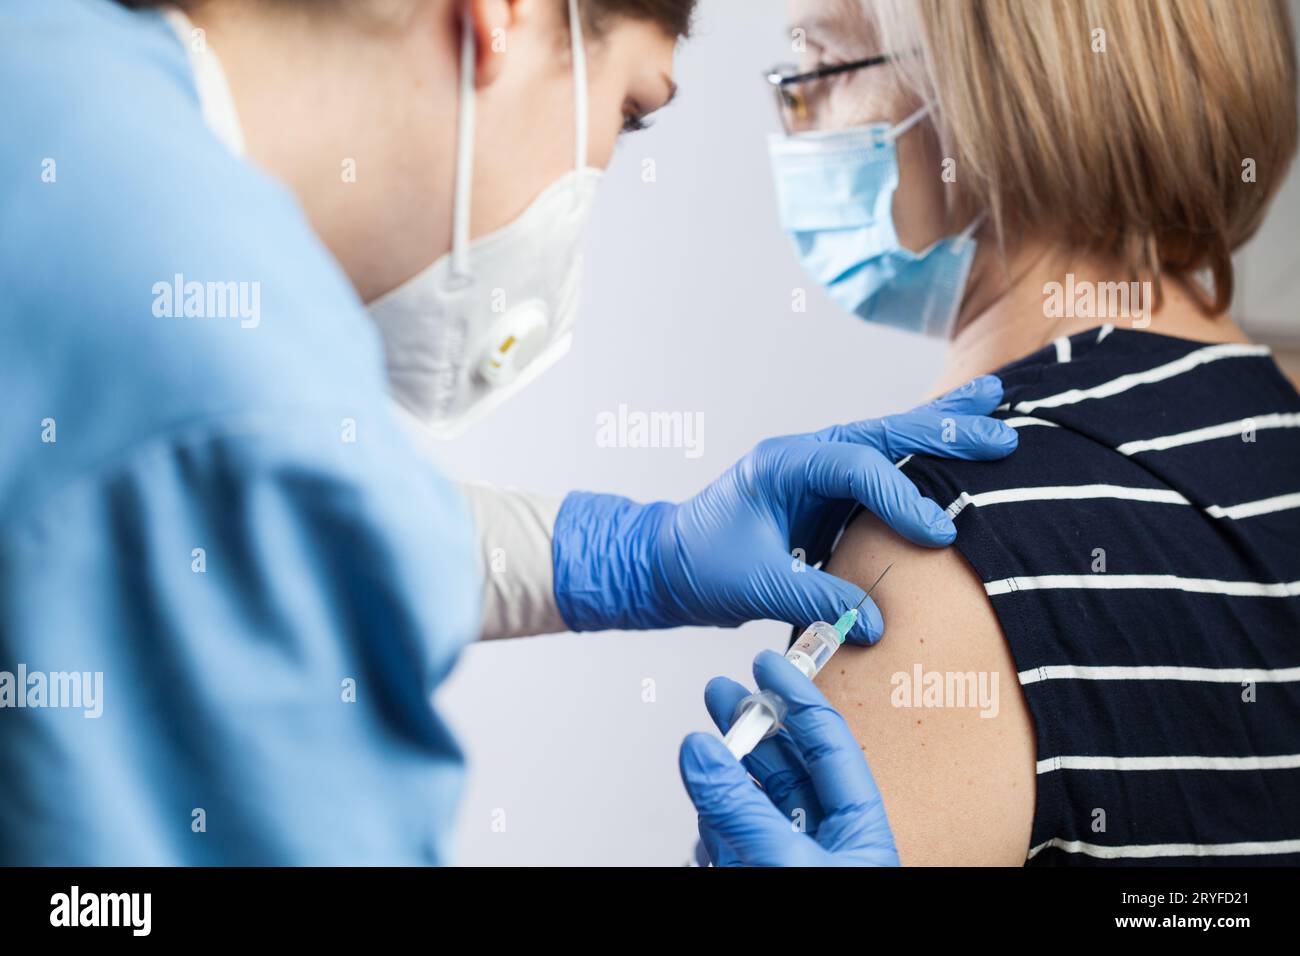 Female medical worker injecting Coronavirus booster dose to elderly patient Stock Photo